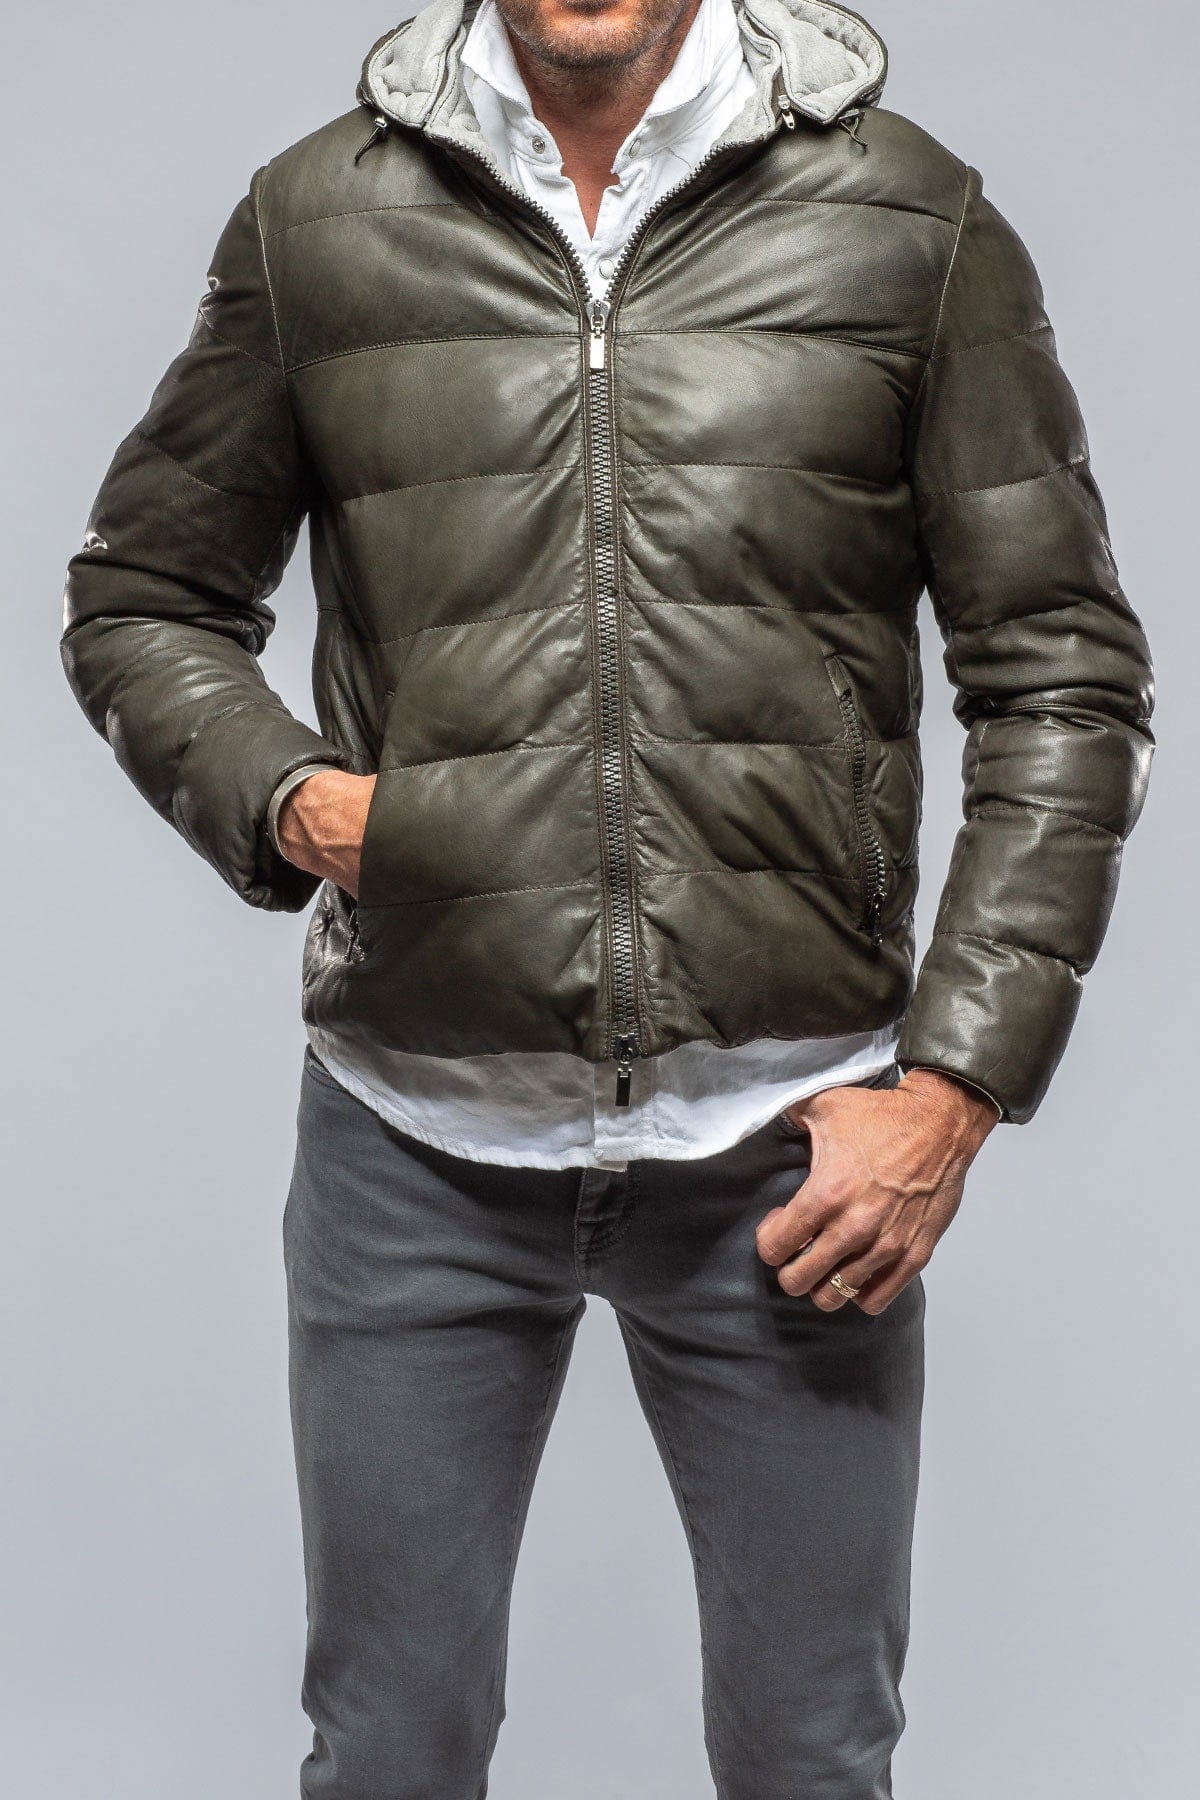 St. Anton Leather Puffer - AXEL'S